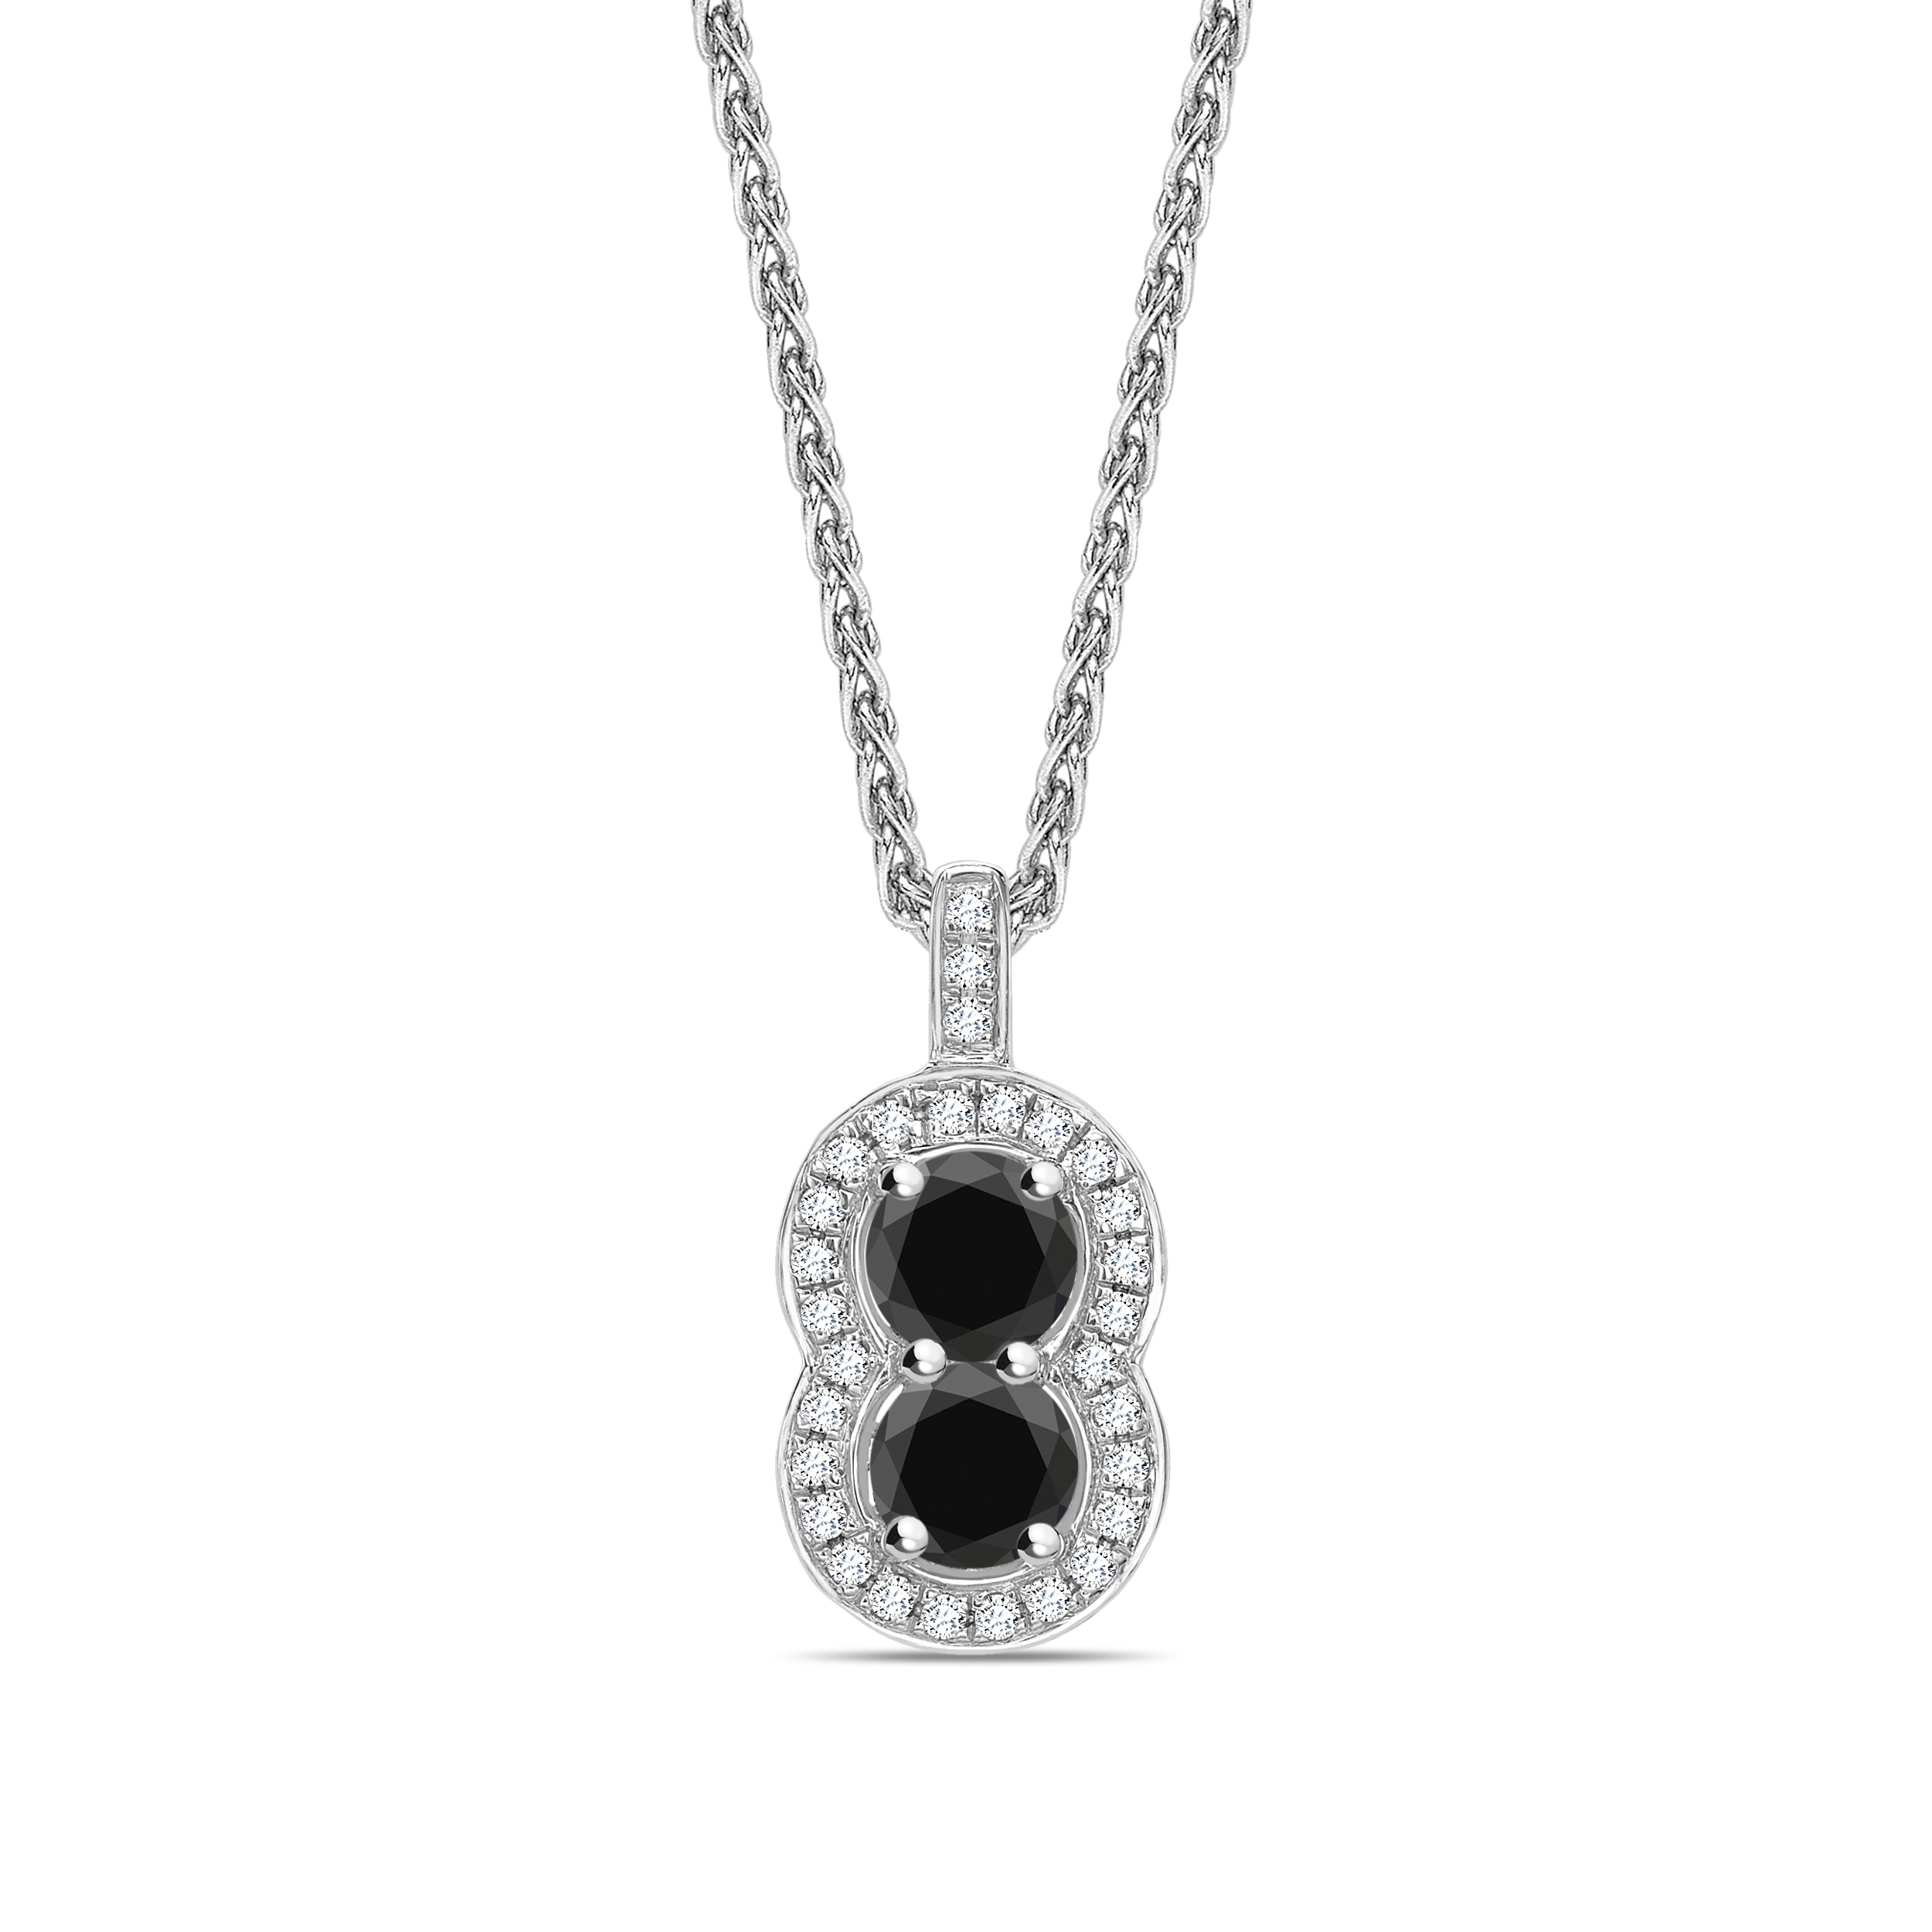 Halo Style Black Diamond Solitaire Pendants Necklace Classic in Round Cut